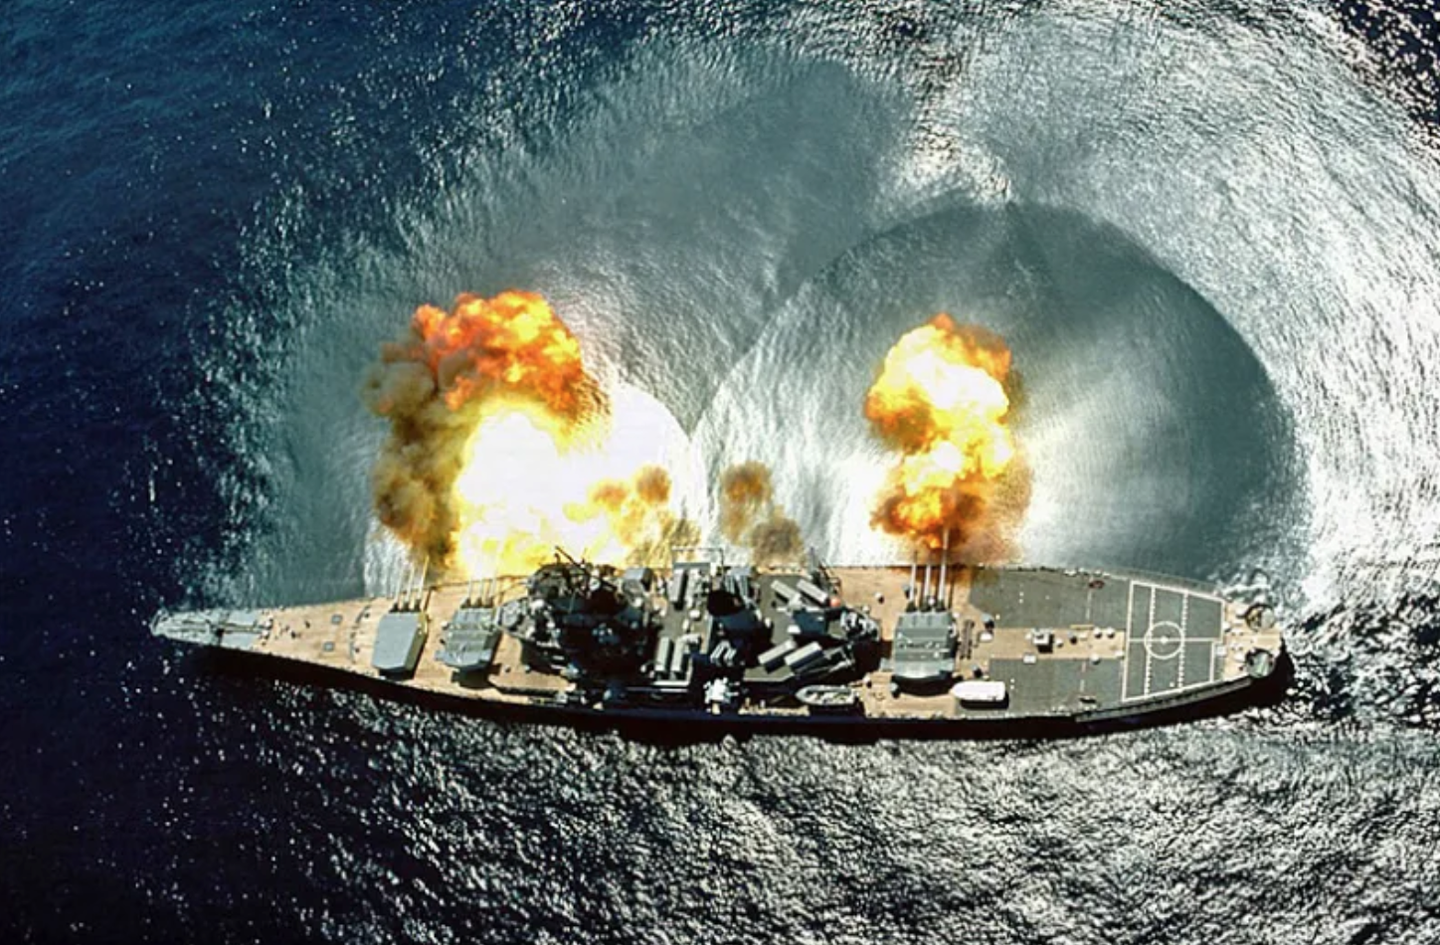 Back when Battleships weren't museums. USS <em>Iowa</em> (BB-61) fires a full broadside of her nine 16″/50 and six 5″/38 guns during a target exercise near Vieques Island, Puerto Rico (<img srcset="//upload.wikimedia.org/wikipedia/commons/thumb/5/55/WMA_button2b.png/17px-WMA_button2b.png 1x, //upload.wikimedia.org/wikipedia/commons/thumb/5/55/WMA_button2b.png/34px-WMA_button2b.png 2x" src="https://upload.wikimedia.org/wikipedia/commons/thumb/5/55/WMA_button2b.png/17px-WMA_button2b.png" alt="">21°N 65°W). Note concussion effects on the water surface, and 16-inch gun barrels in varying degrees of recoil. (National Archives)